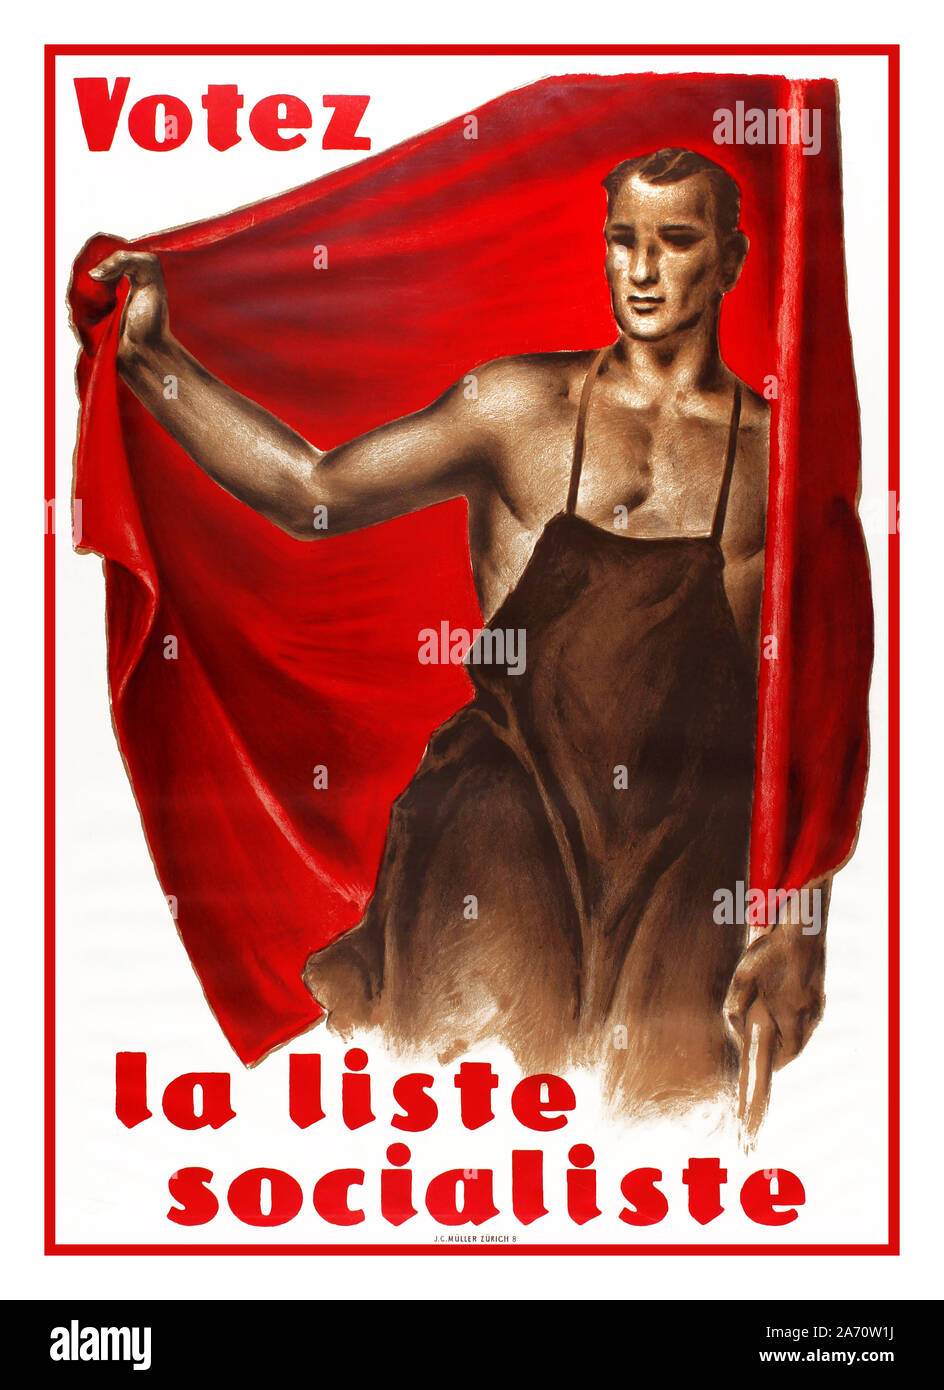 Vintage 1930's Swiss political propaganda election poster printed in Zurich Switzerland promoting the socialist vote - “Votez la liste socialiste” - depicting a man sketched in shades of brown, holding a red socialist flag   1930s, Switzerland, Stock Photo